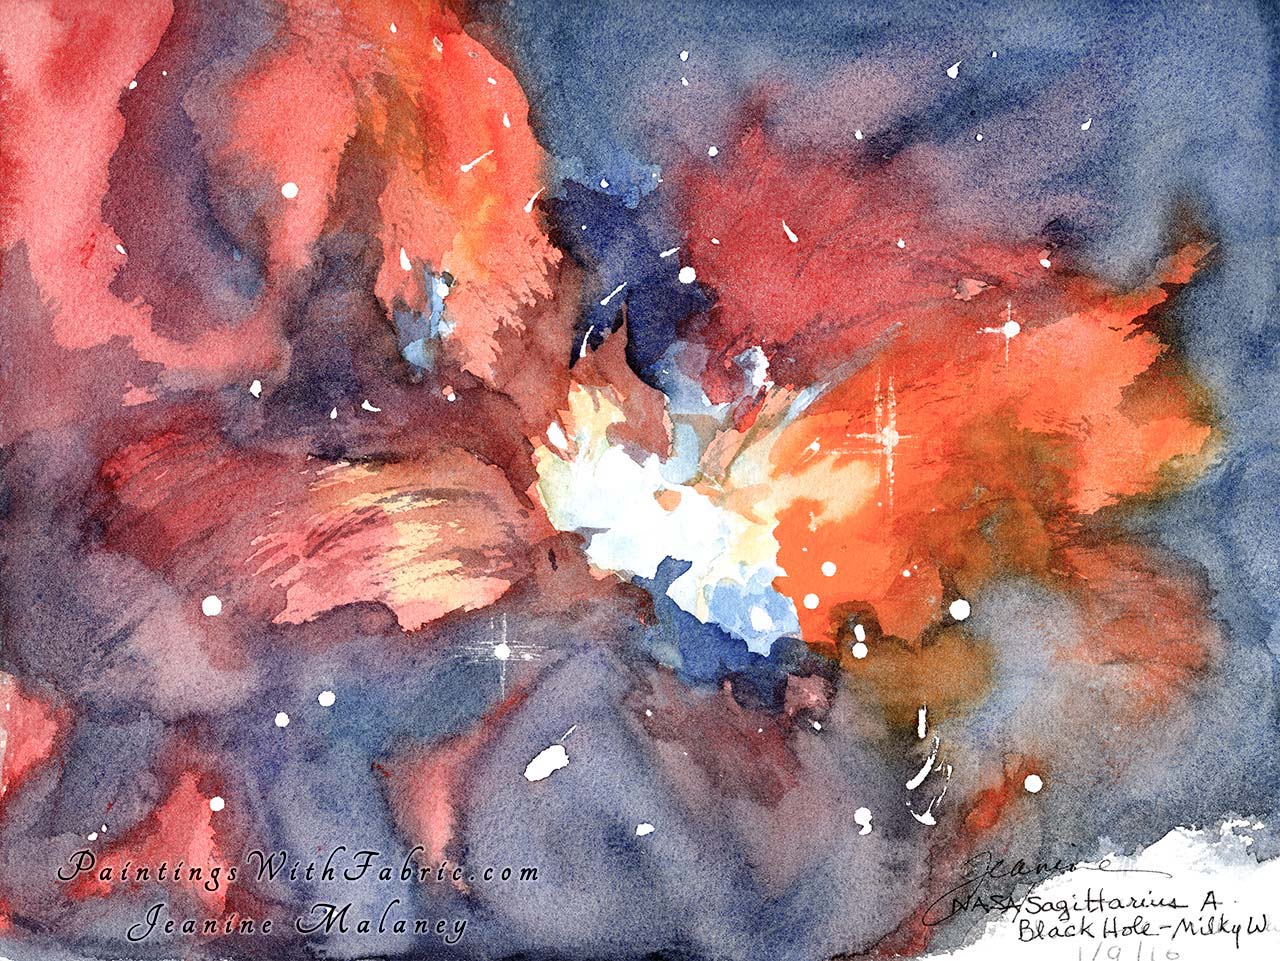 Gods Passion in Creation Unframed Original Watercolor Painting A celestial wonder